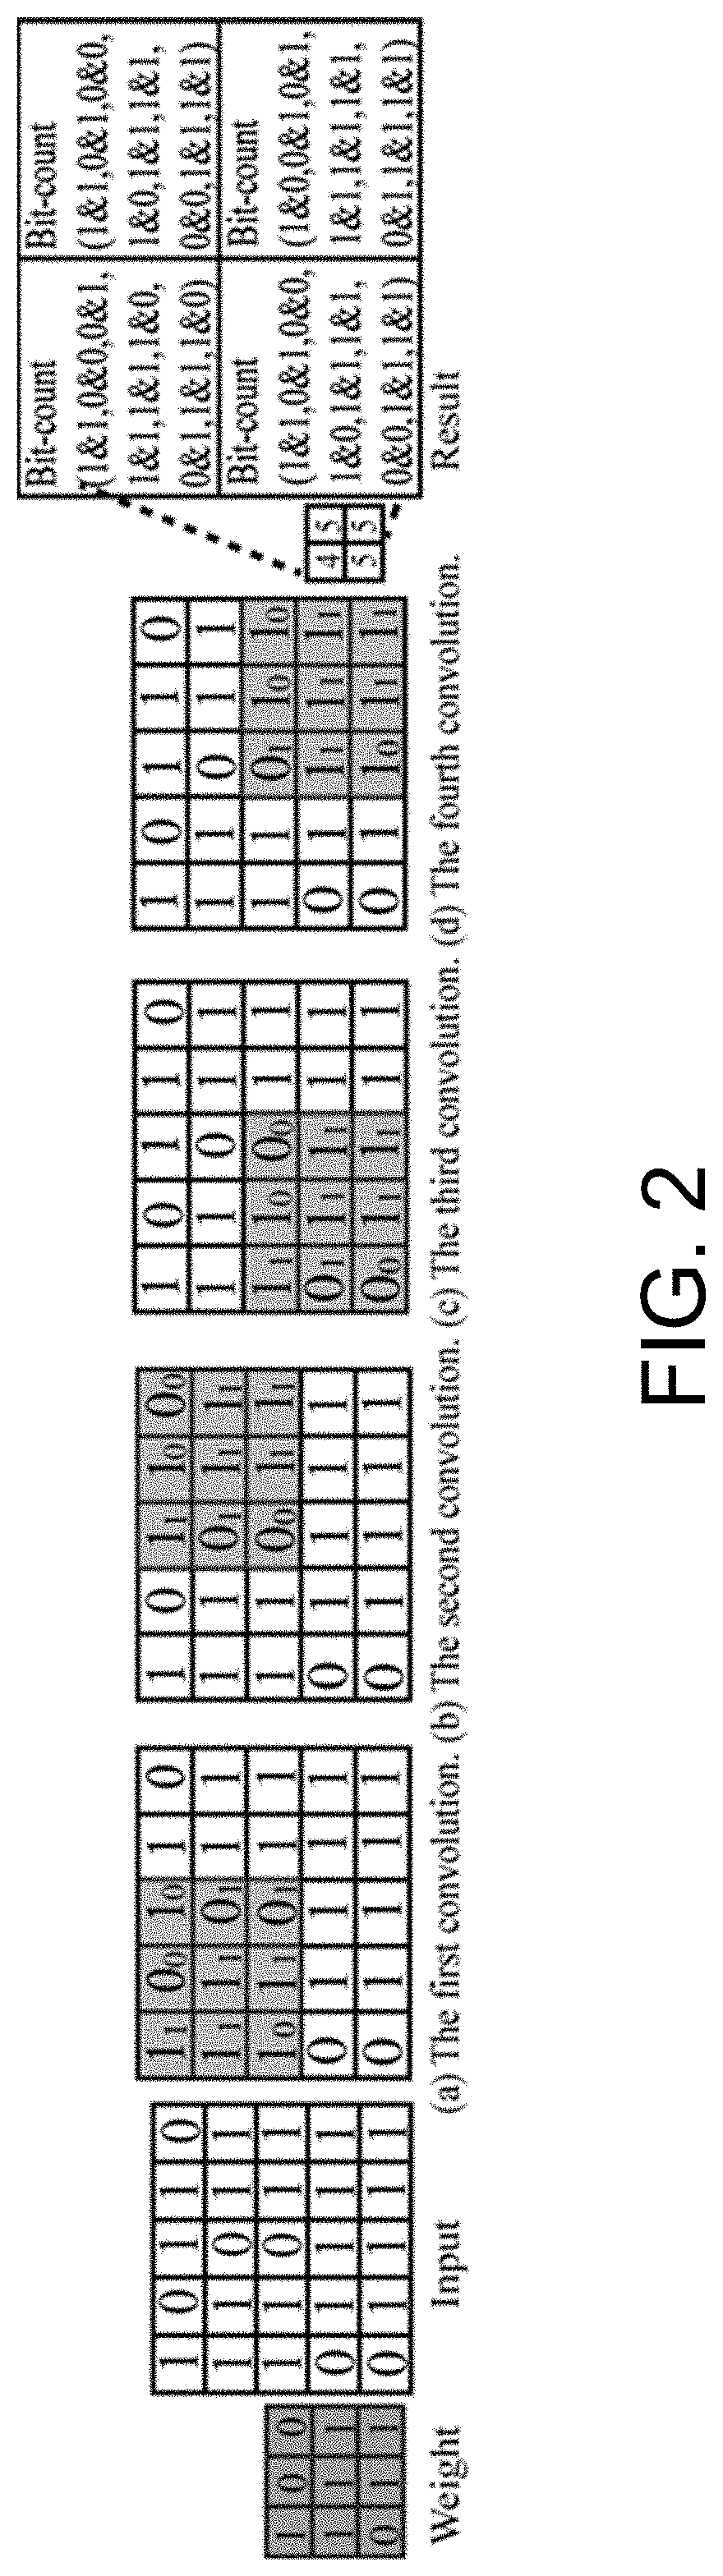 Computing in-memory system and method based on skyrmion racetrack memory